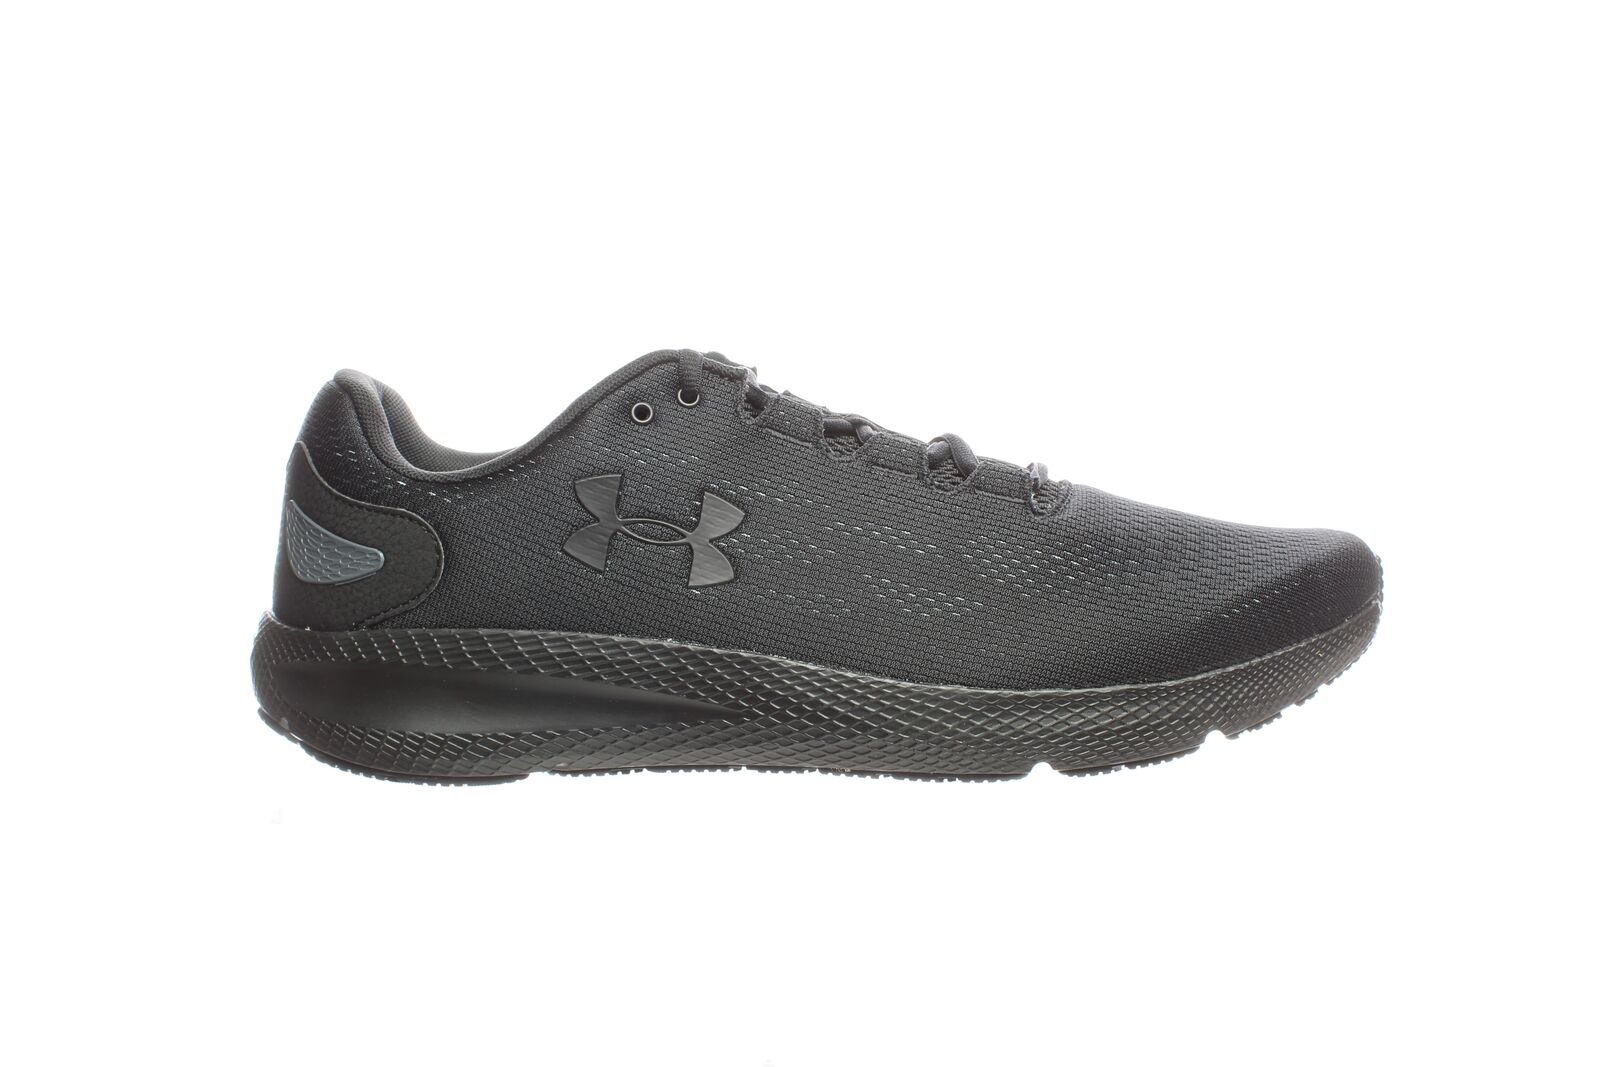 Under Armour Mens Charged Pursuit 2 Black Running Shoes Size 15 (1929006)